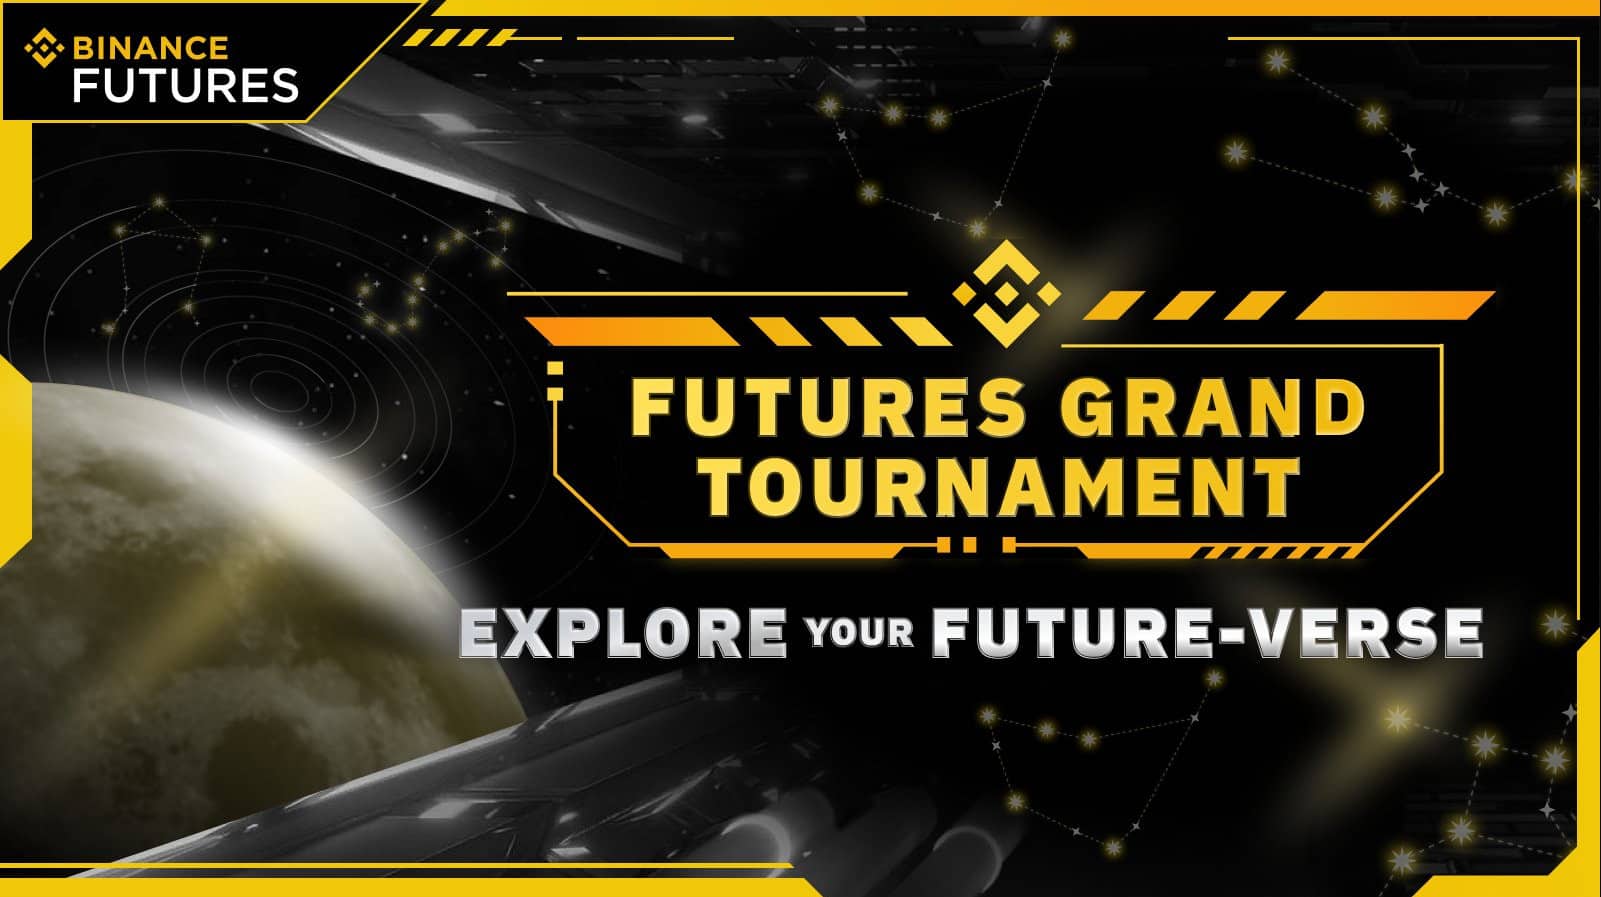 Binance Futures Grand Tournament Provides 1.8M BUSD and LimitedEdition